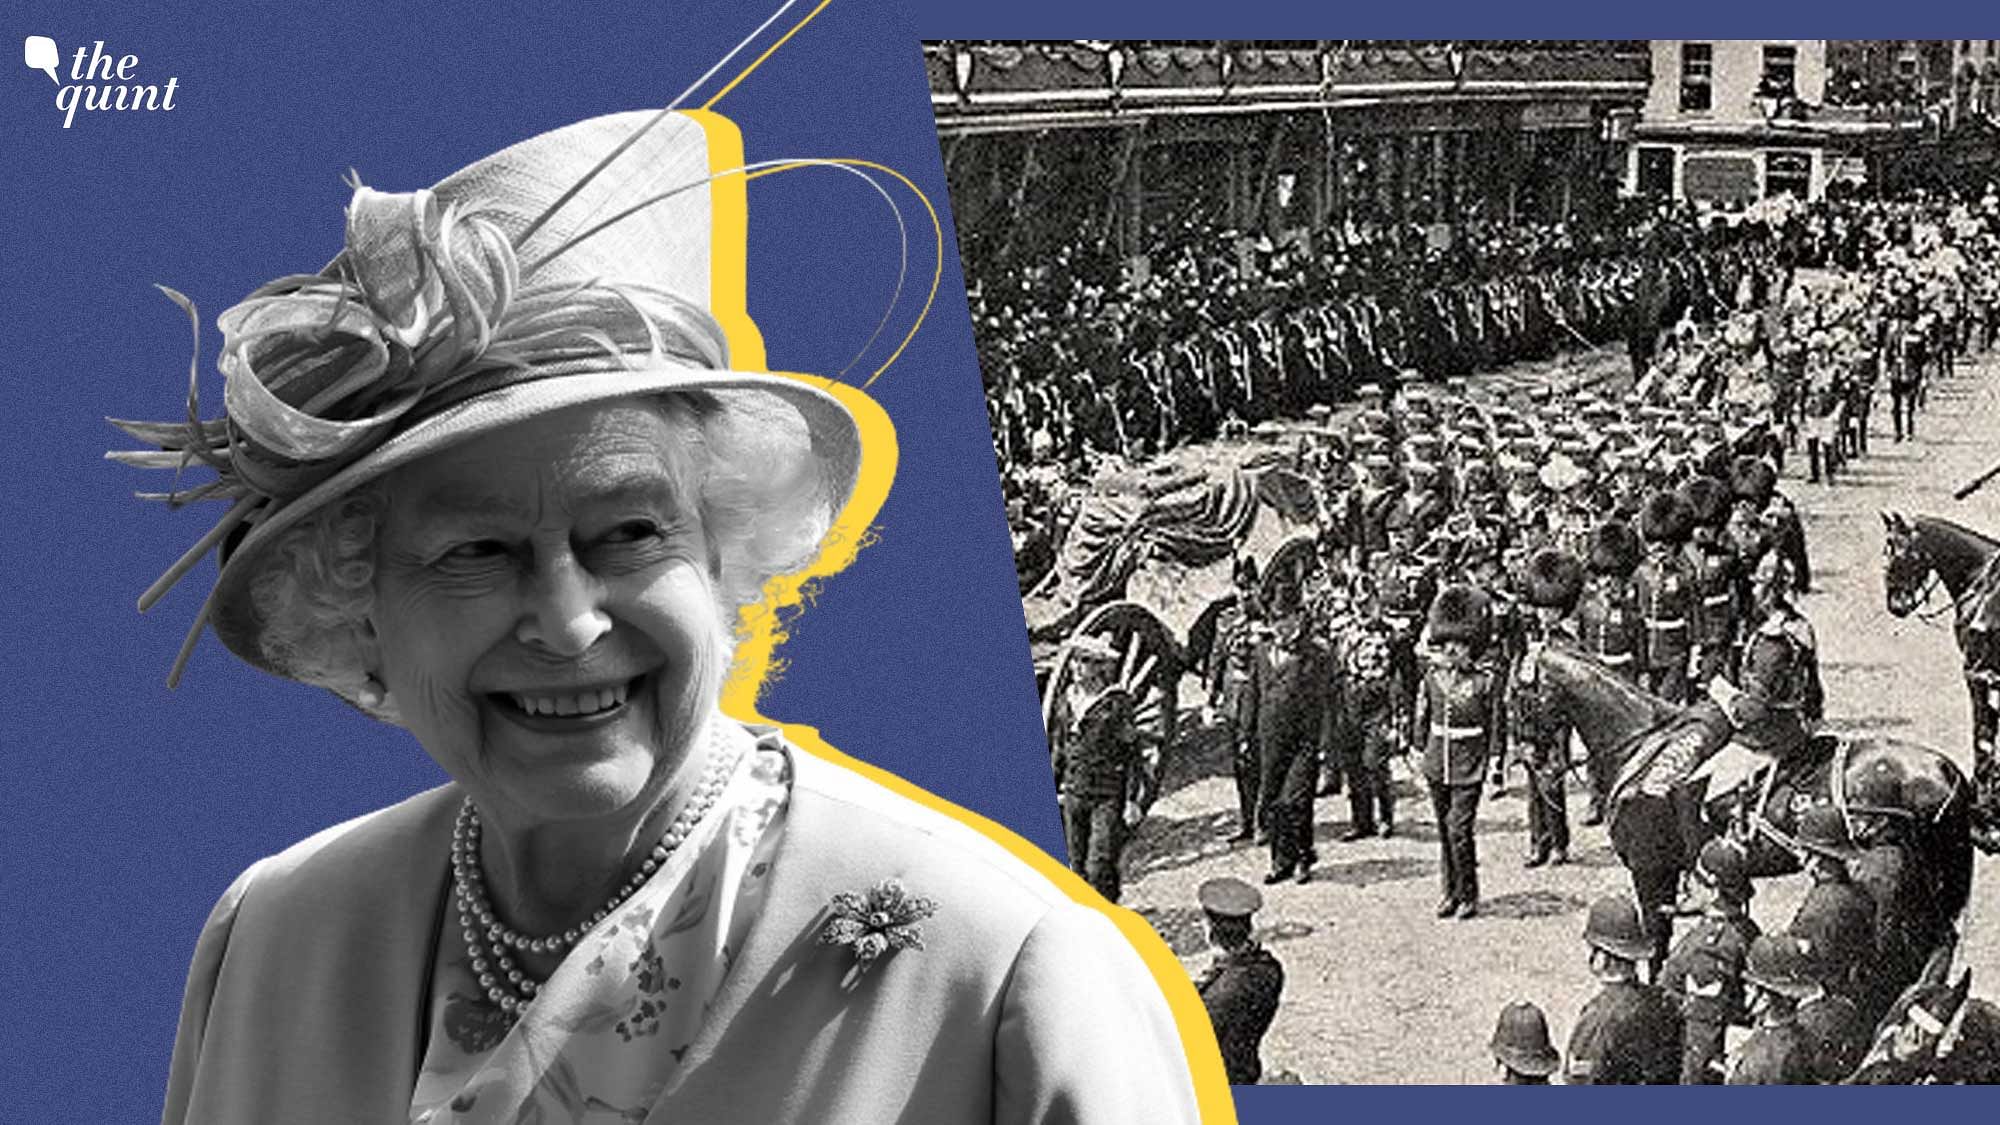 <div class="paragraphs"><p>The Queen's last rites will see a sea of crowd as a rite of passage for The Royals.</p></div>